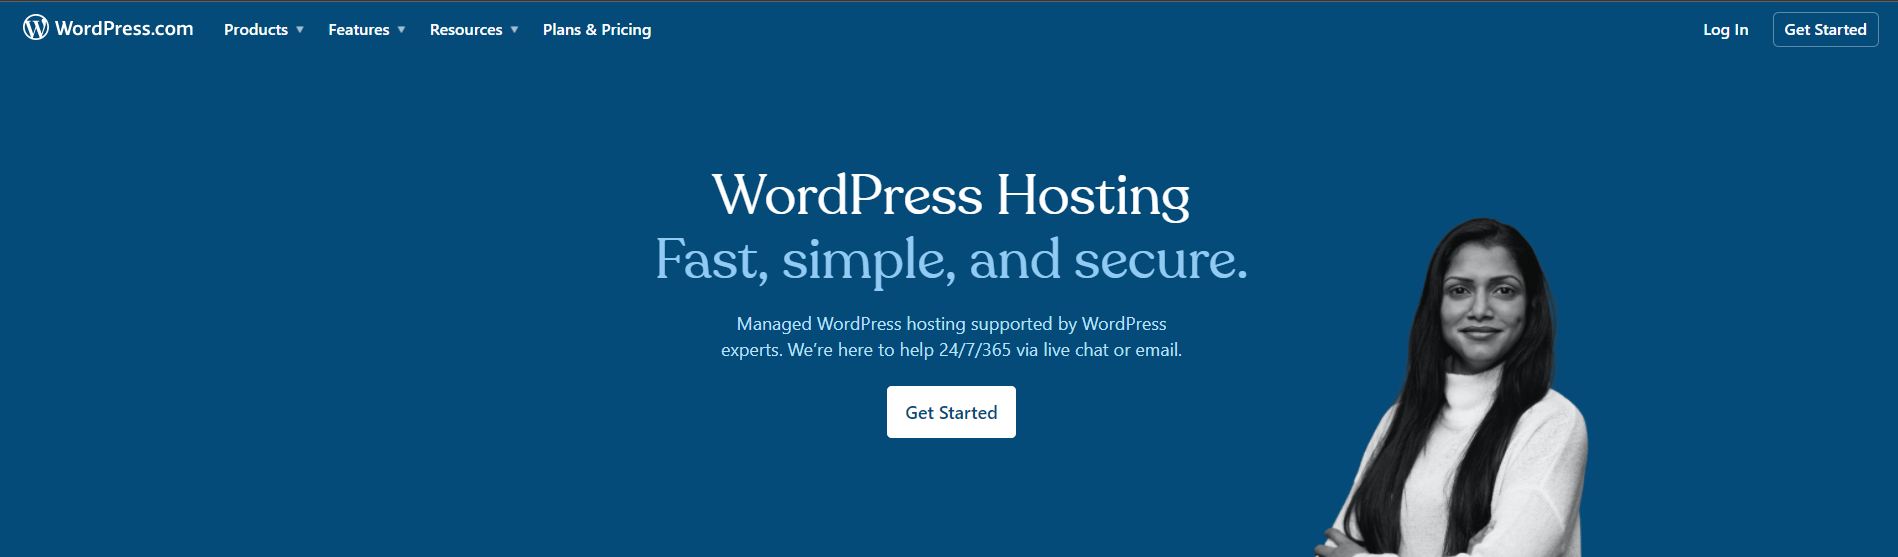 WordPress Hosting - How Much Does It Cost to Start a Blog